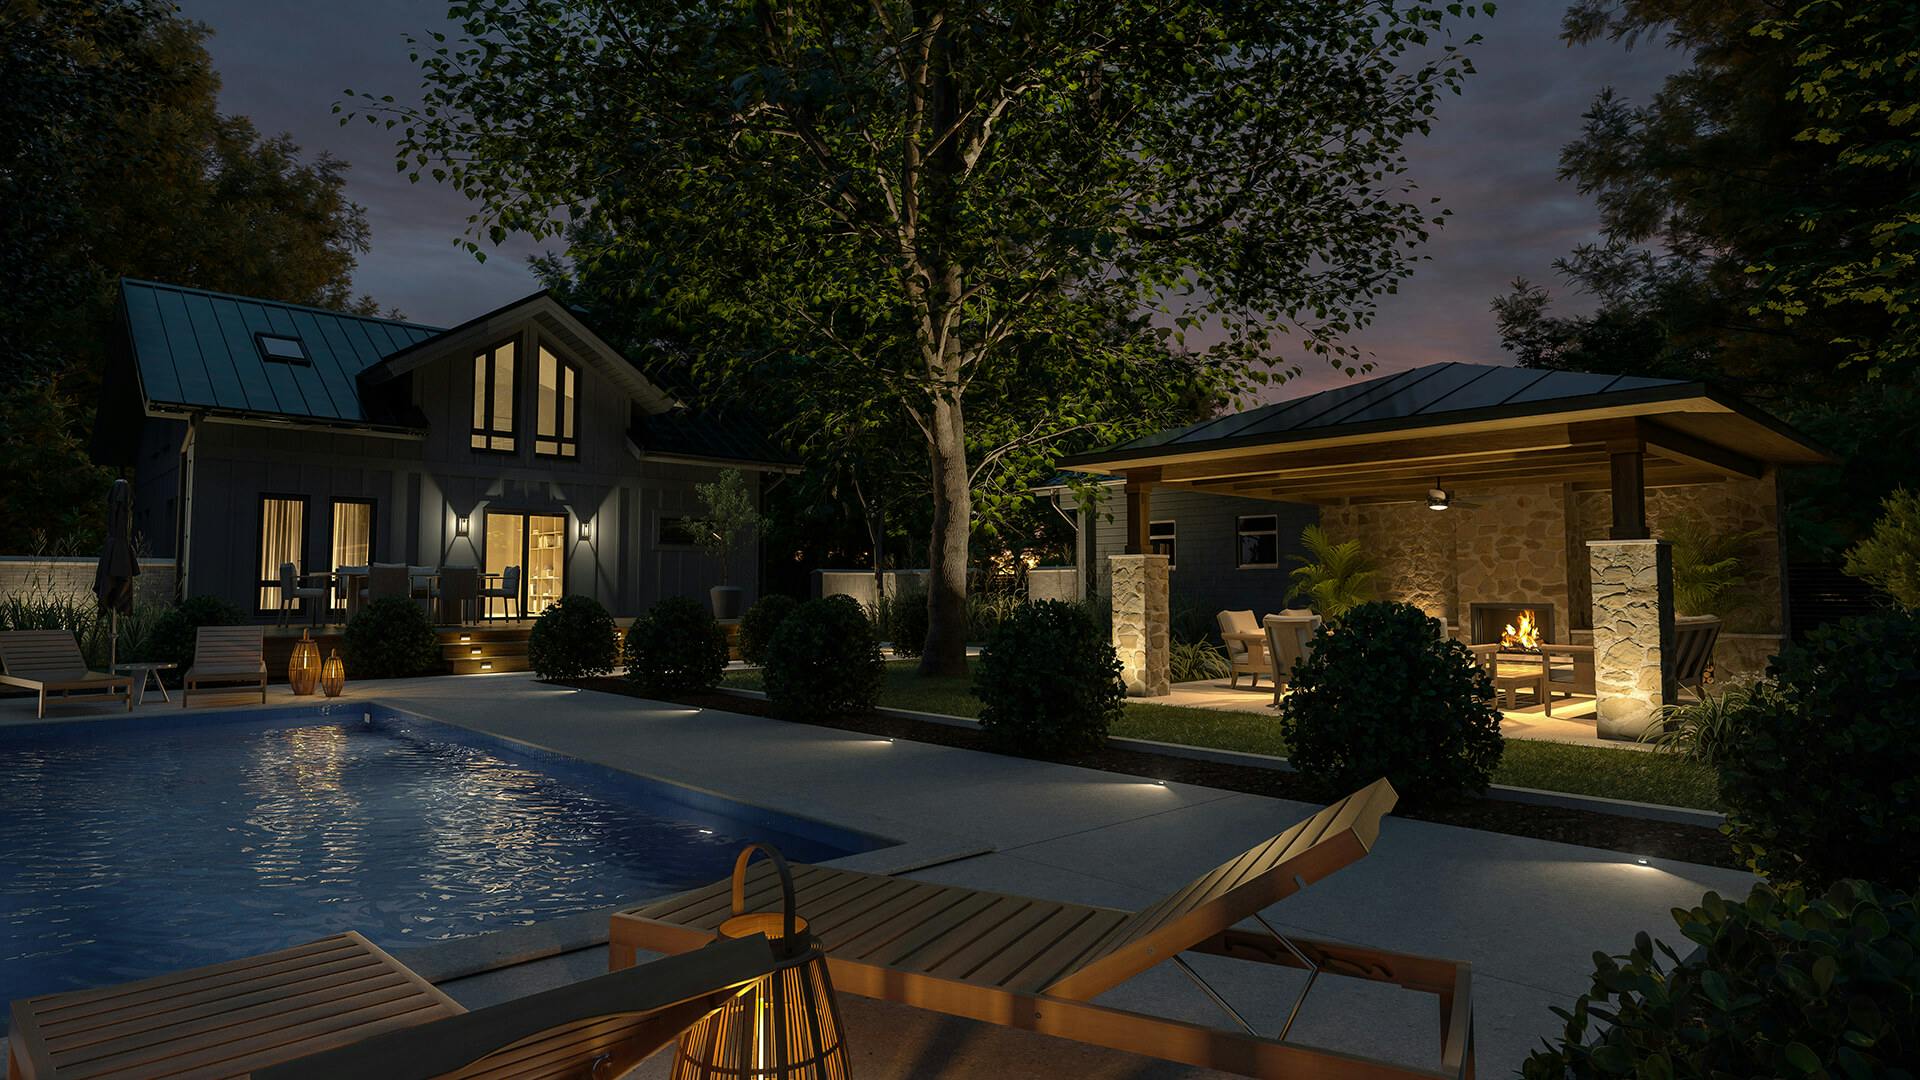 Exterior of a pool house and outdoor patio at night with variety of lighting on the buildings, pathways and trees